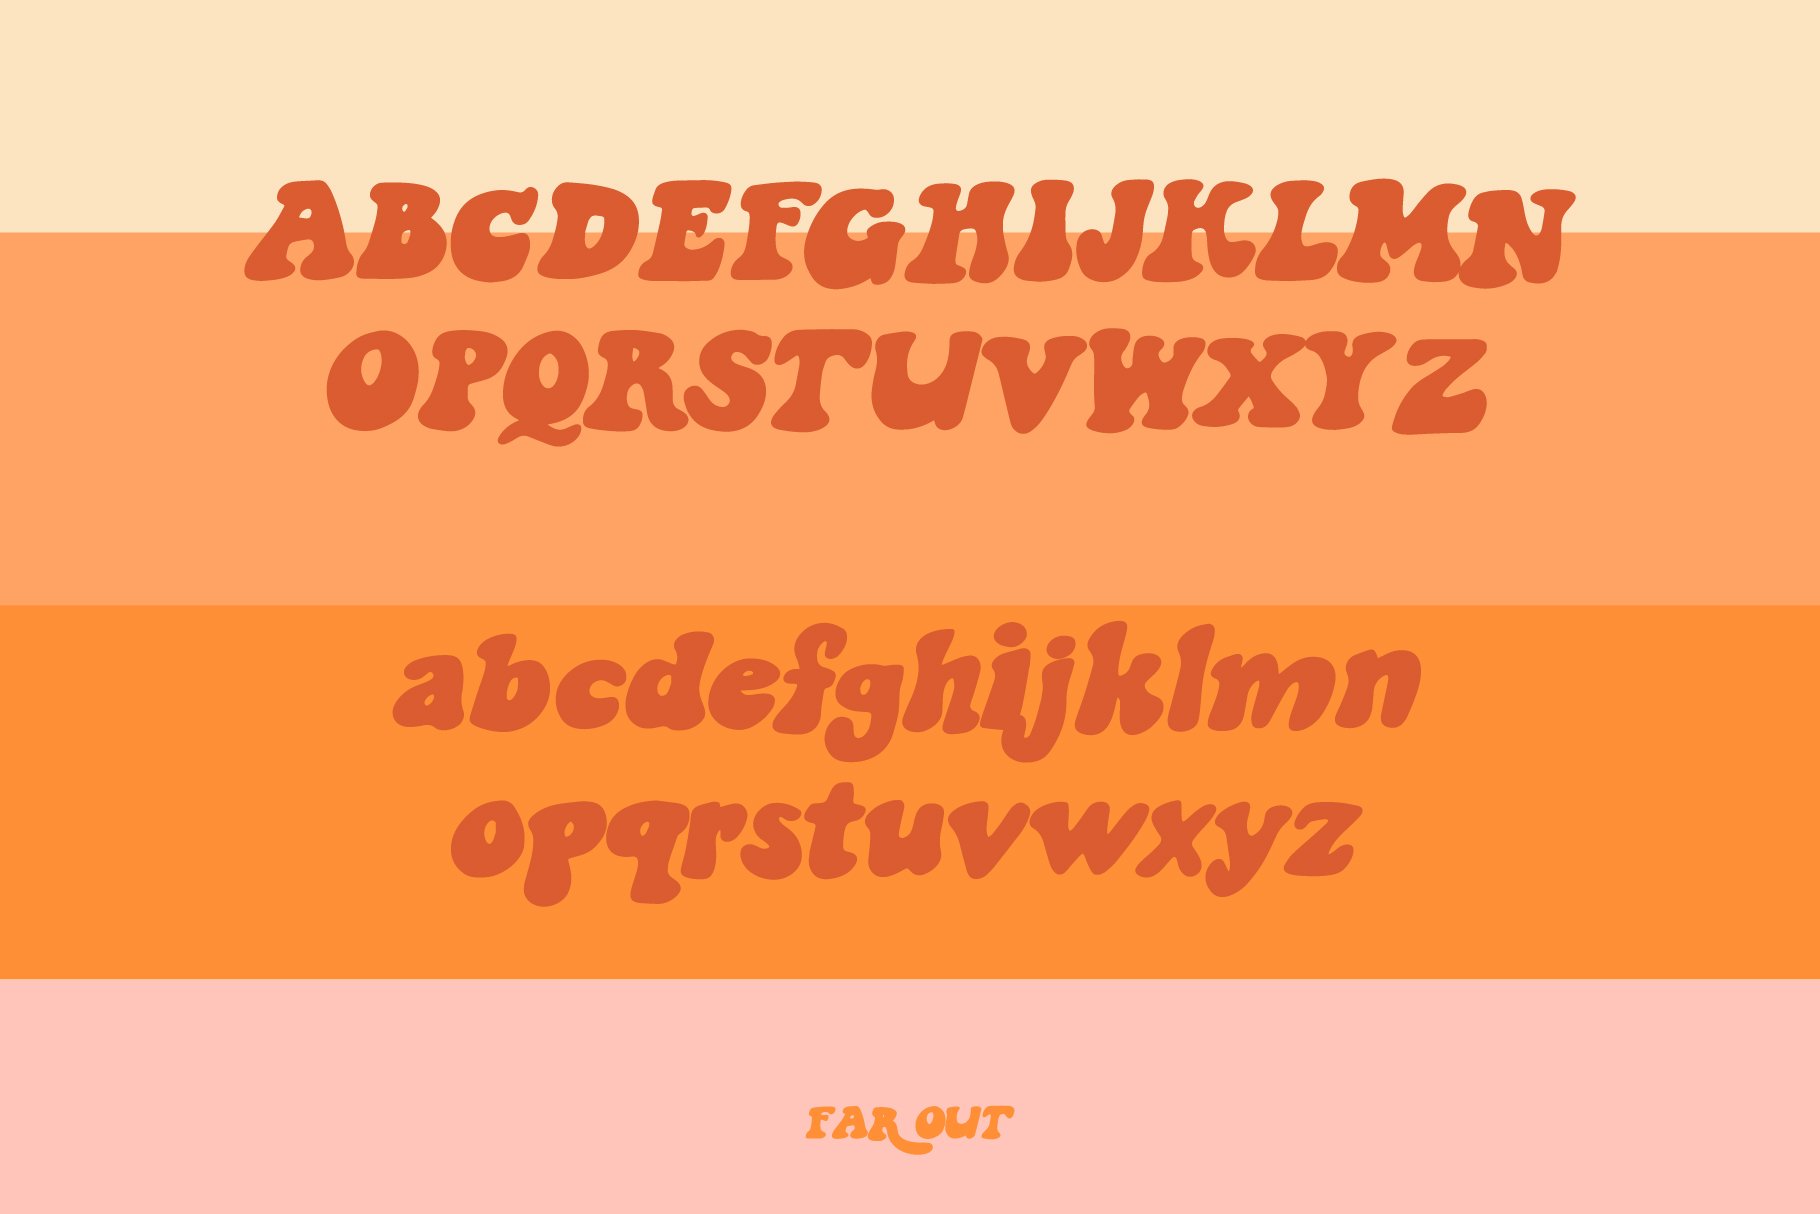 Far Out! - A Groovy Typeface preview image.